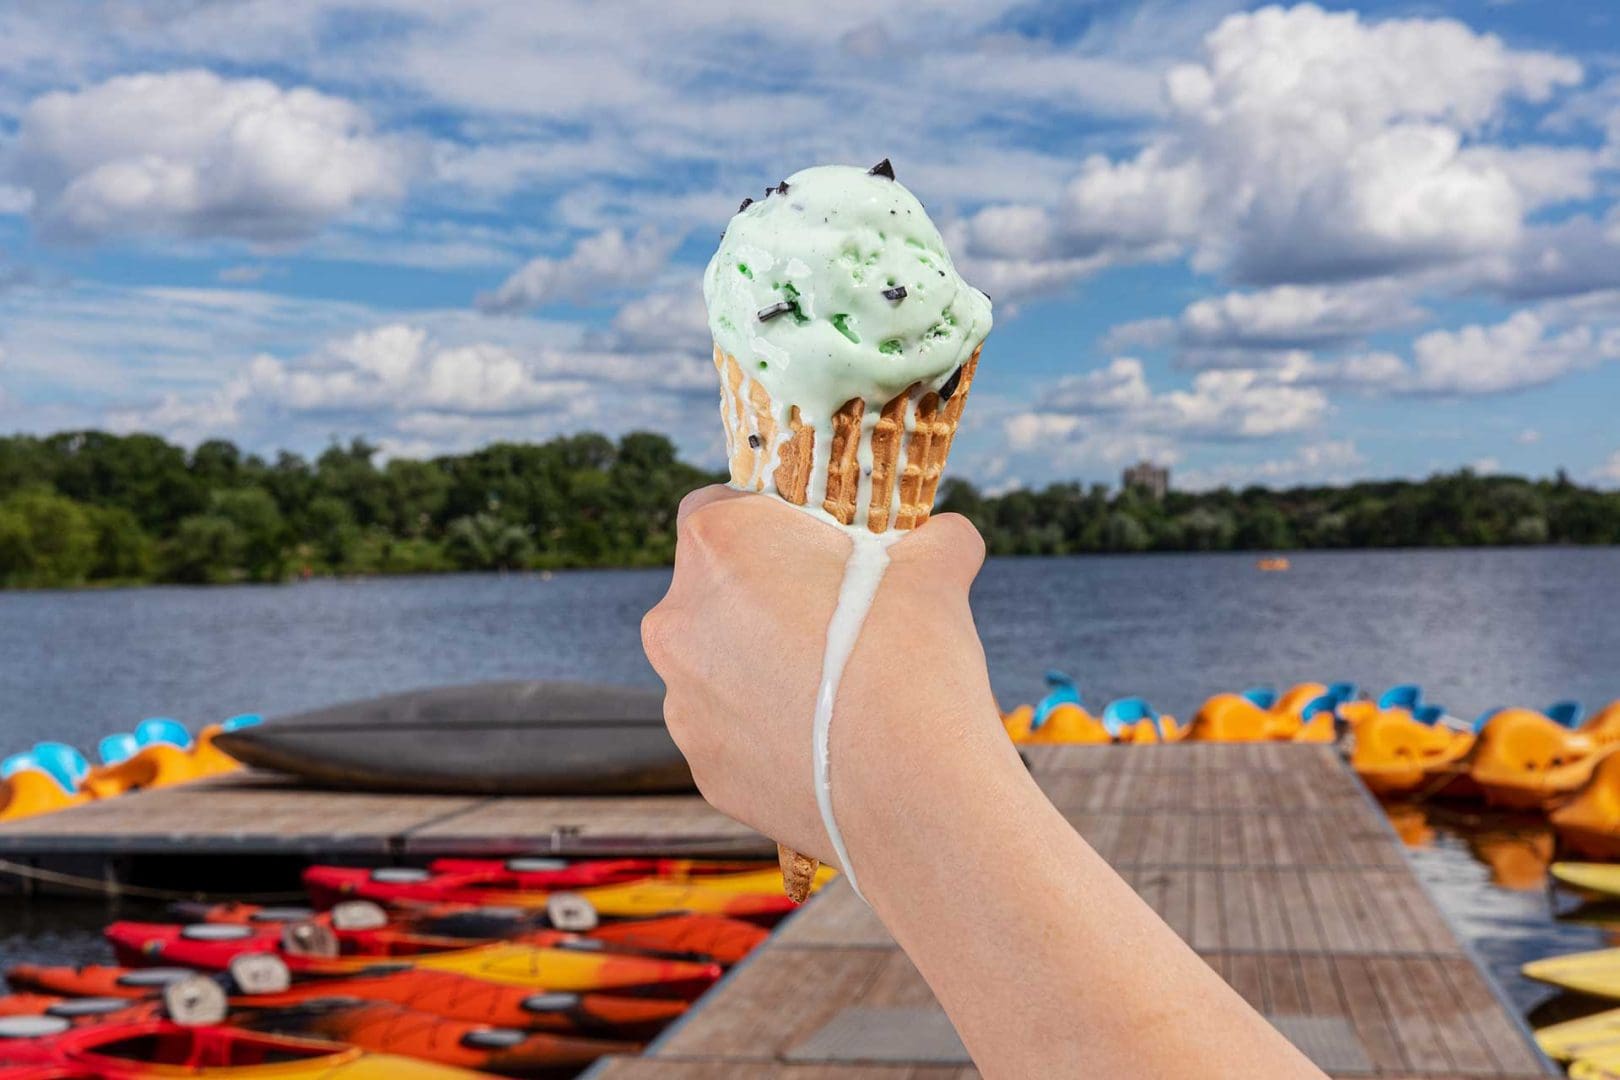 Hand holding ice cream cone that is melting, sky and lake in the background